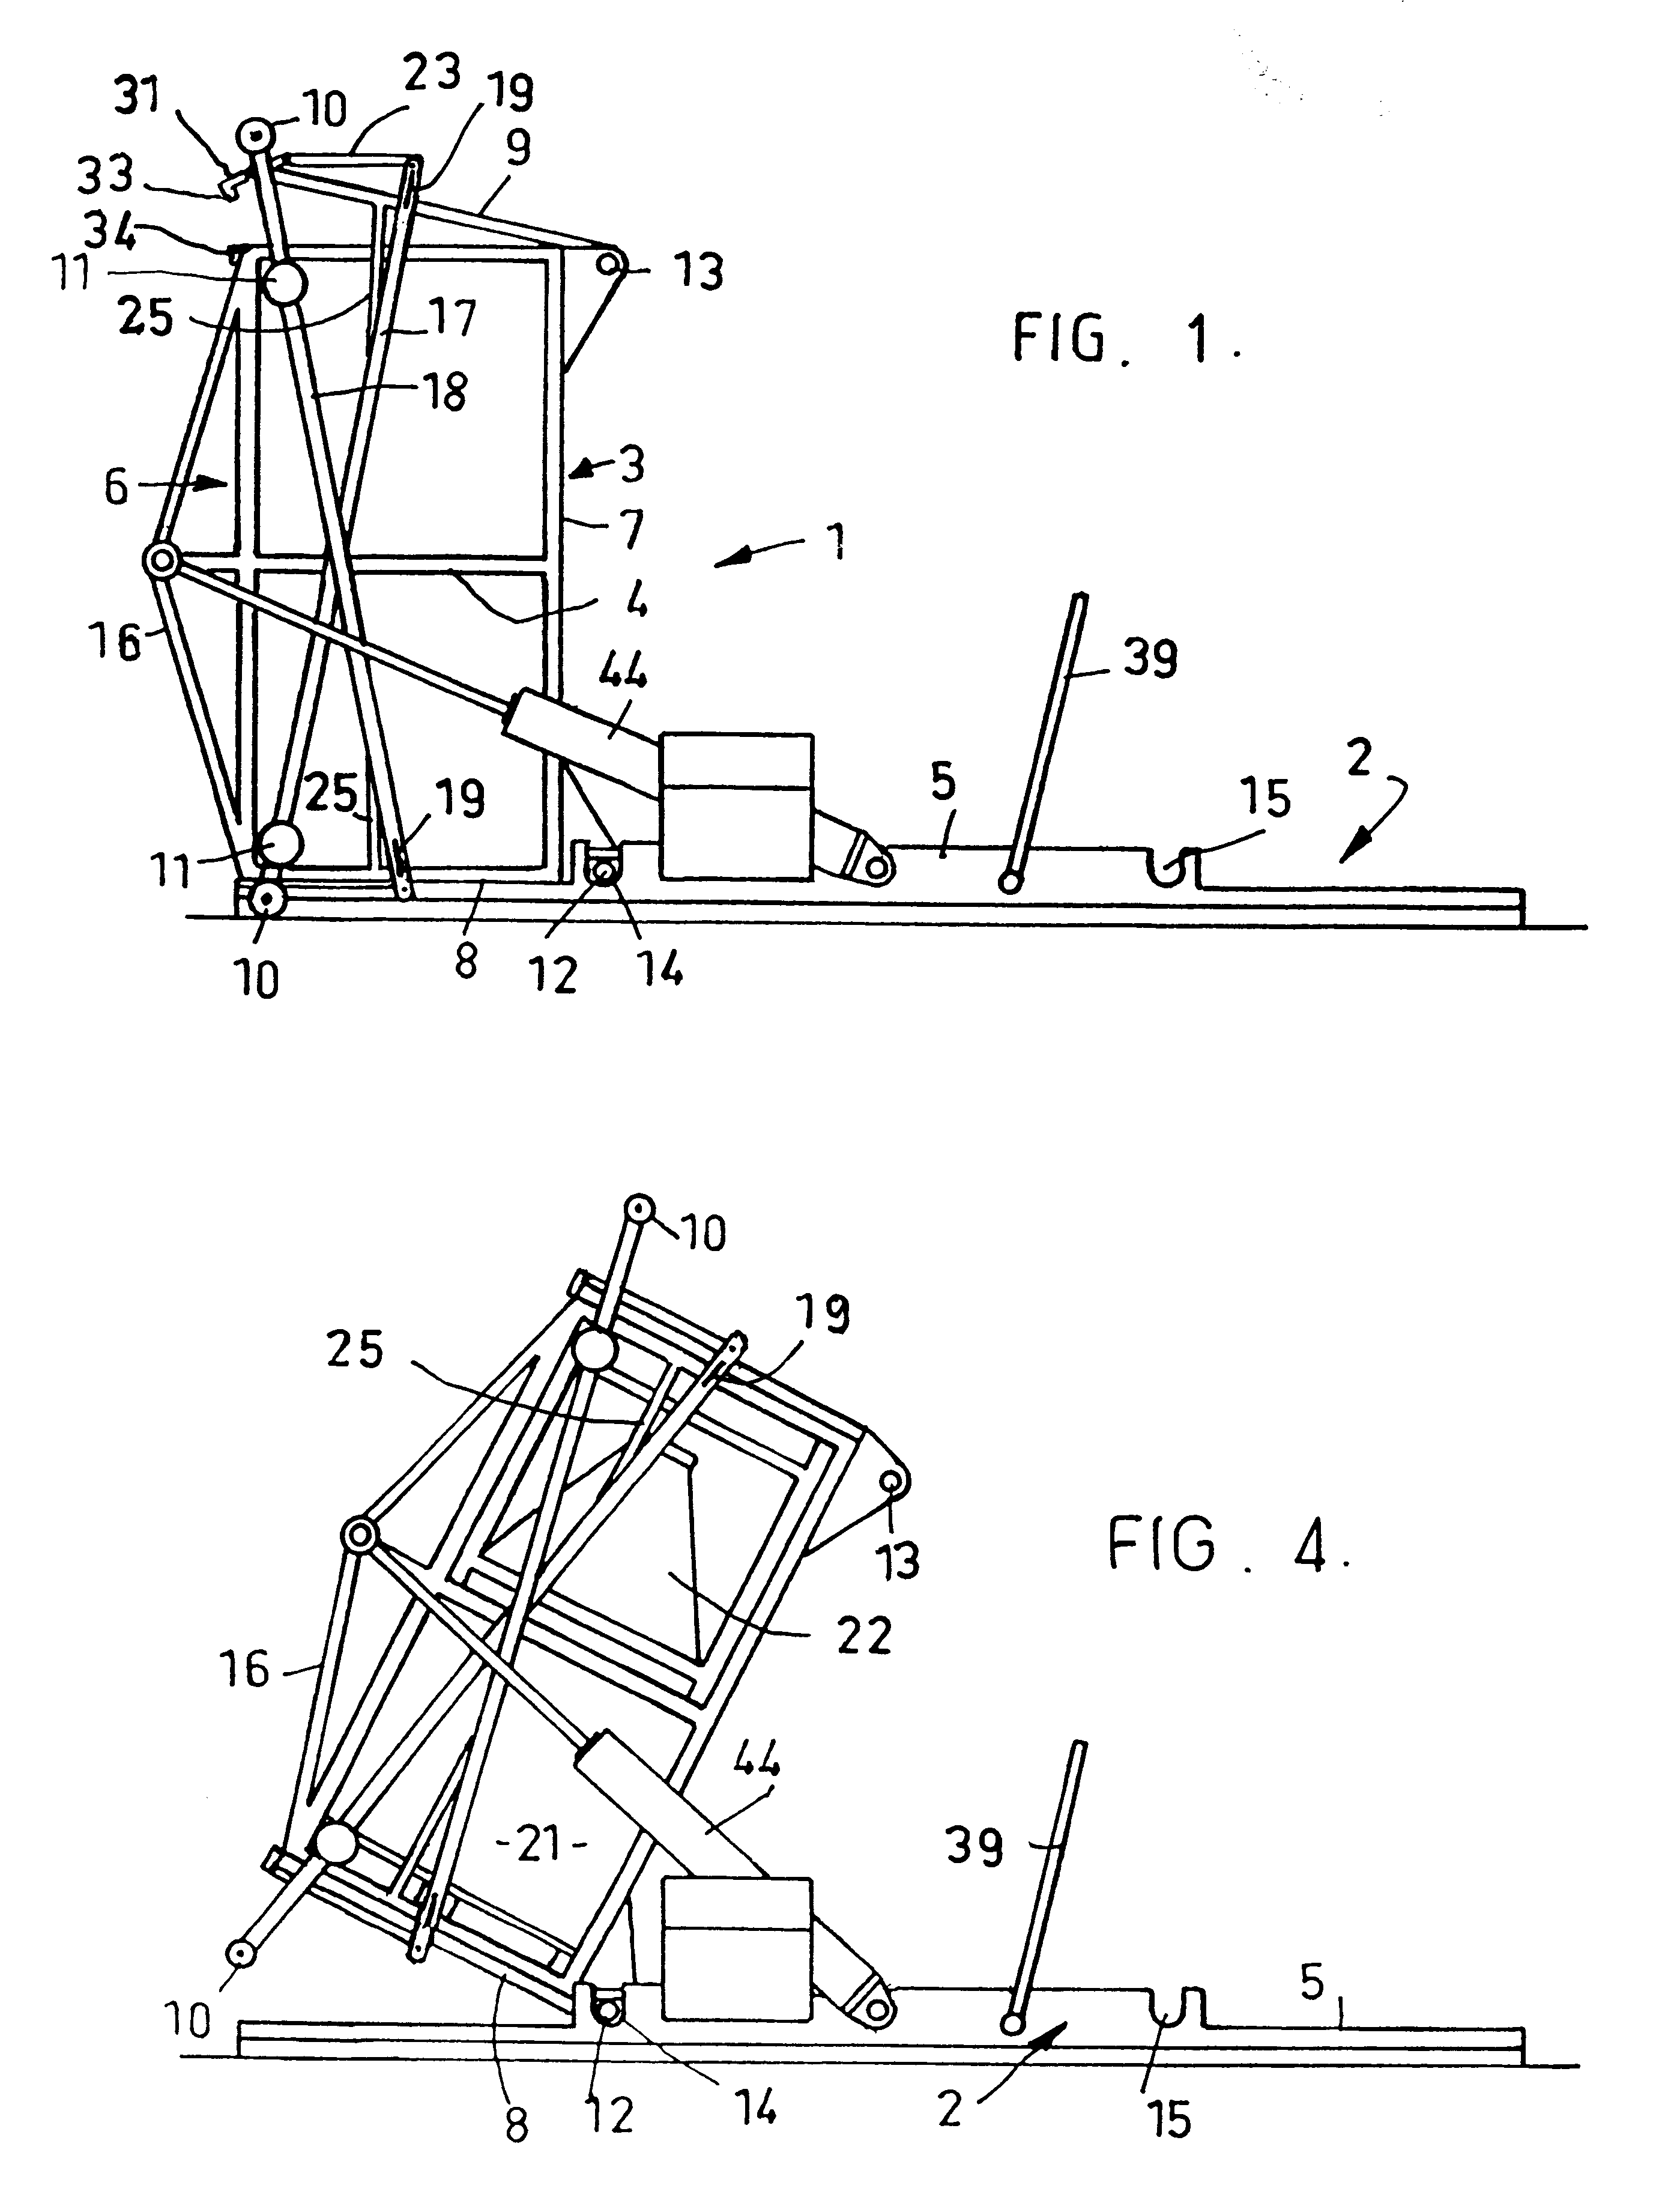 Apparatus for inverting containers